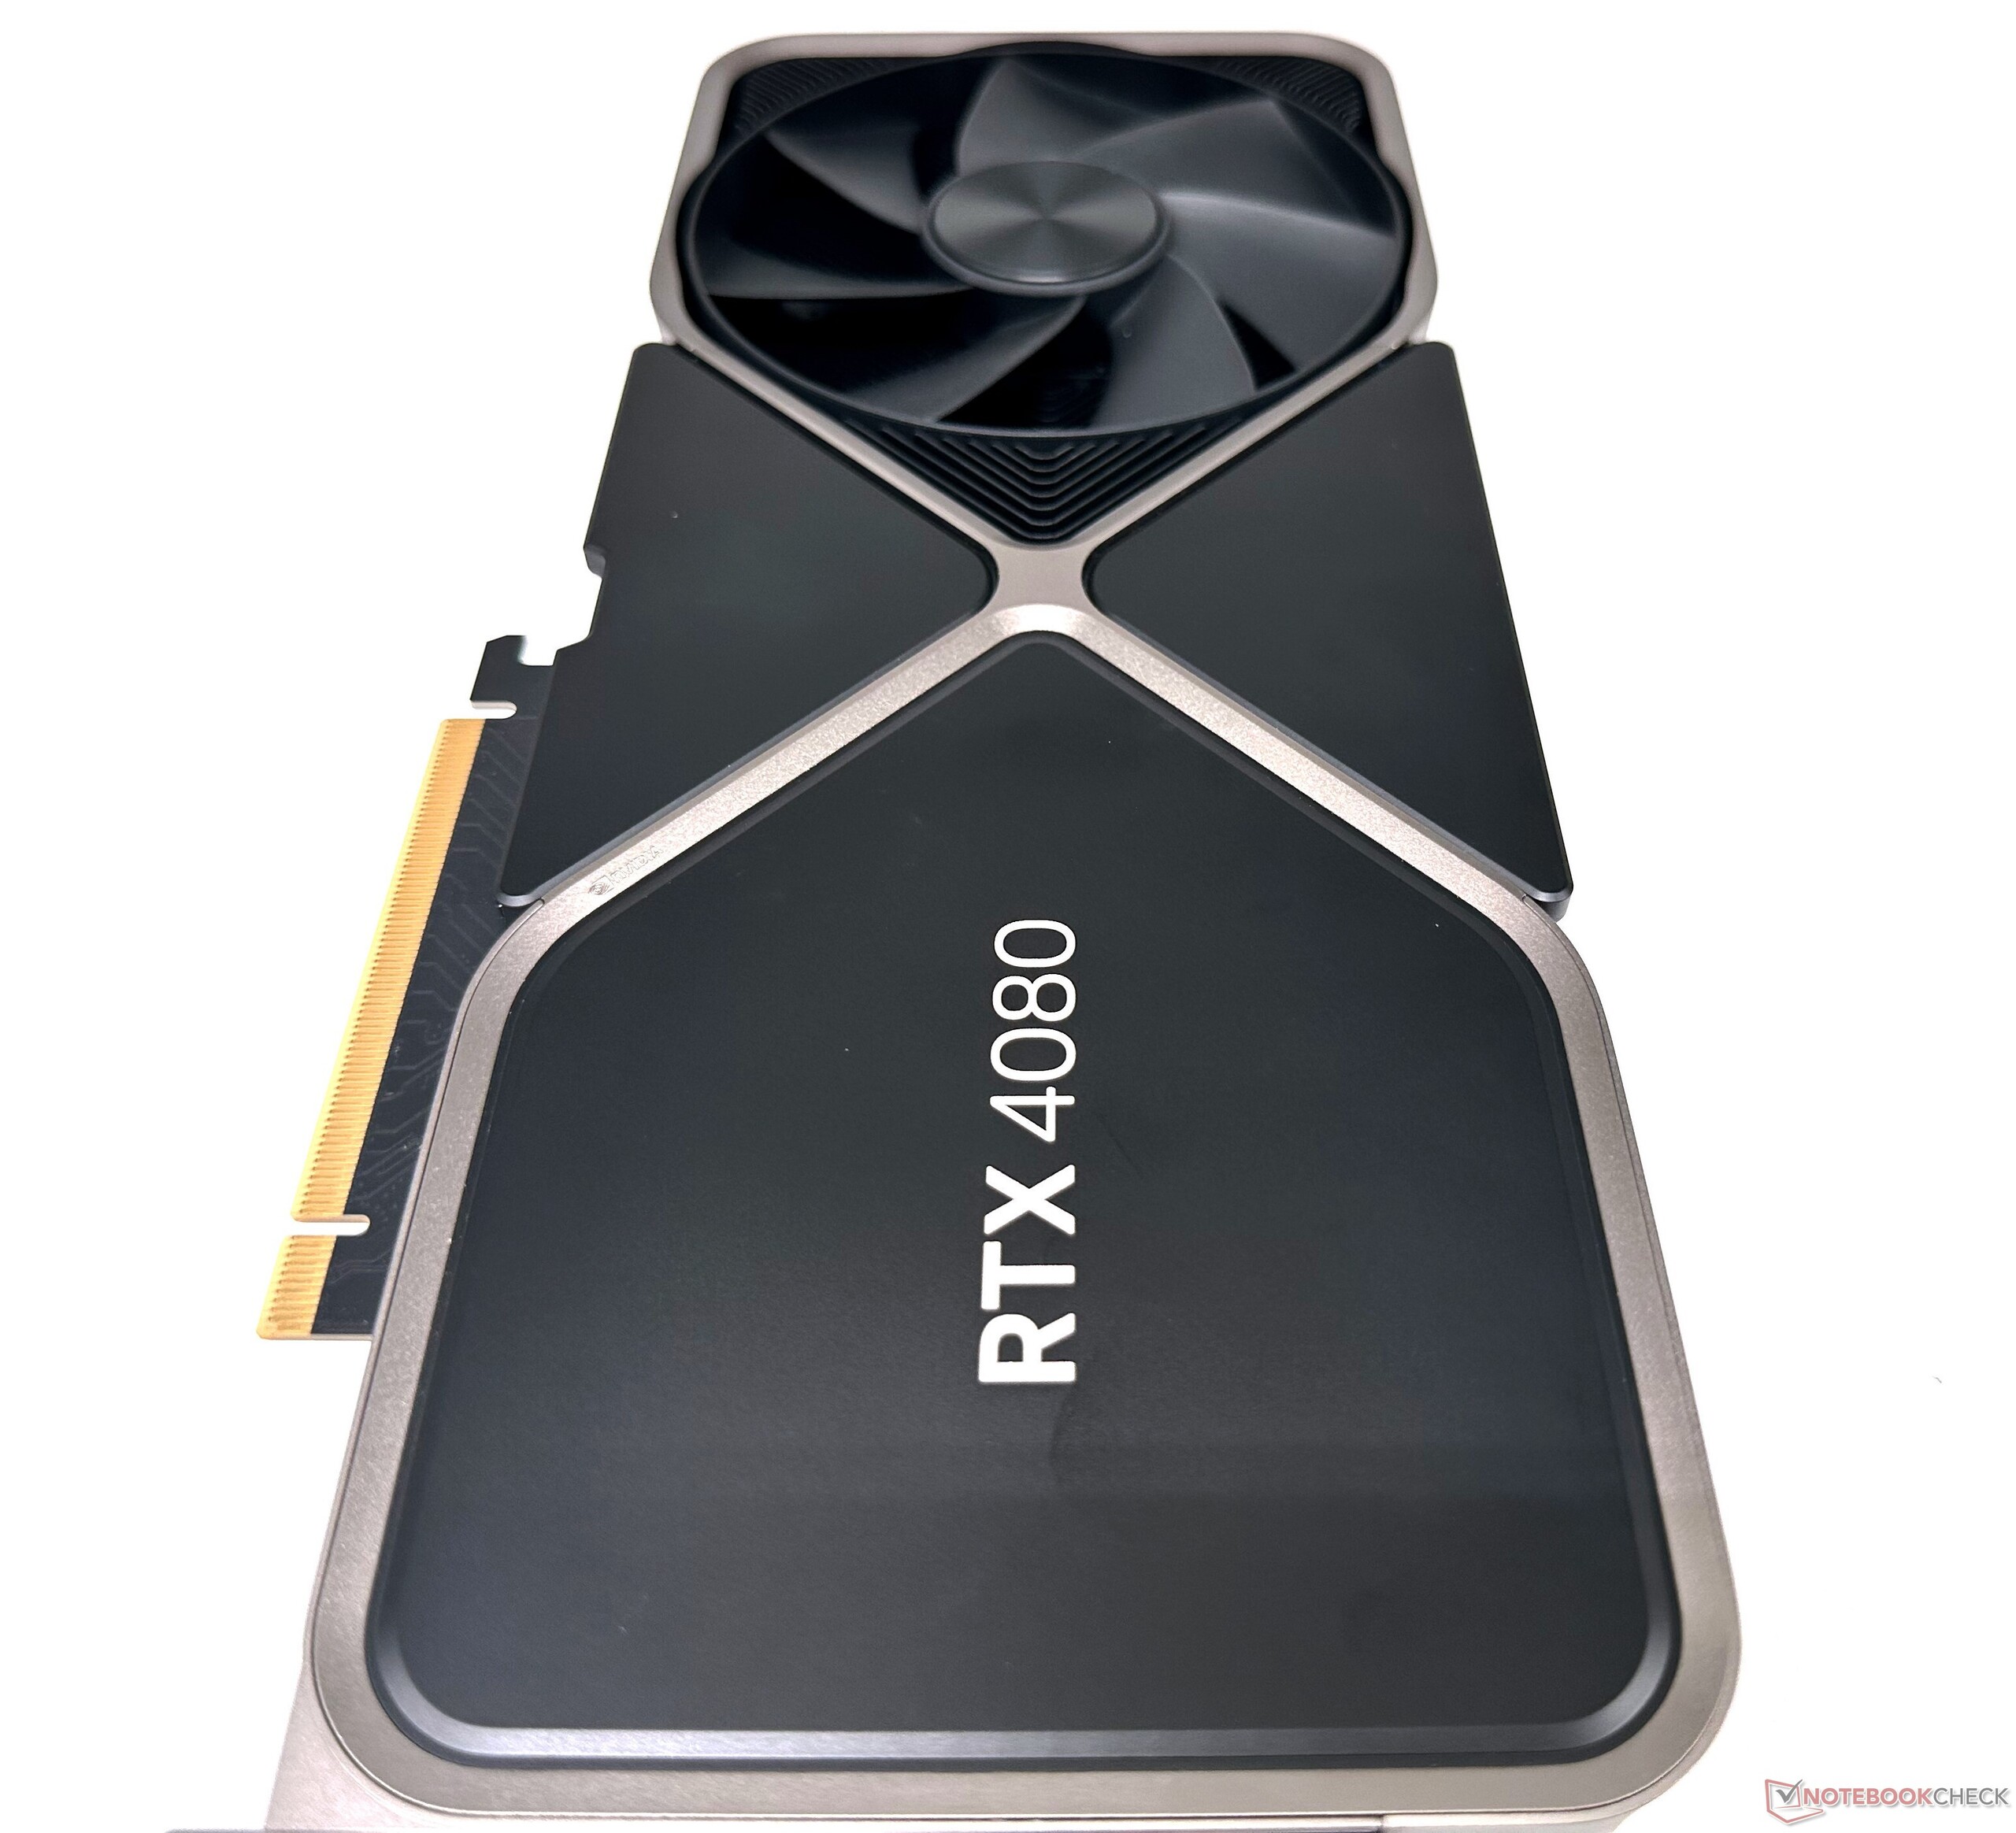 Nvidia RTX 4080 price cut reportedly coming this month to battle AMD -  Dexerto